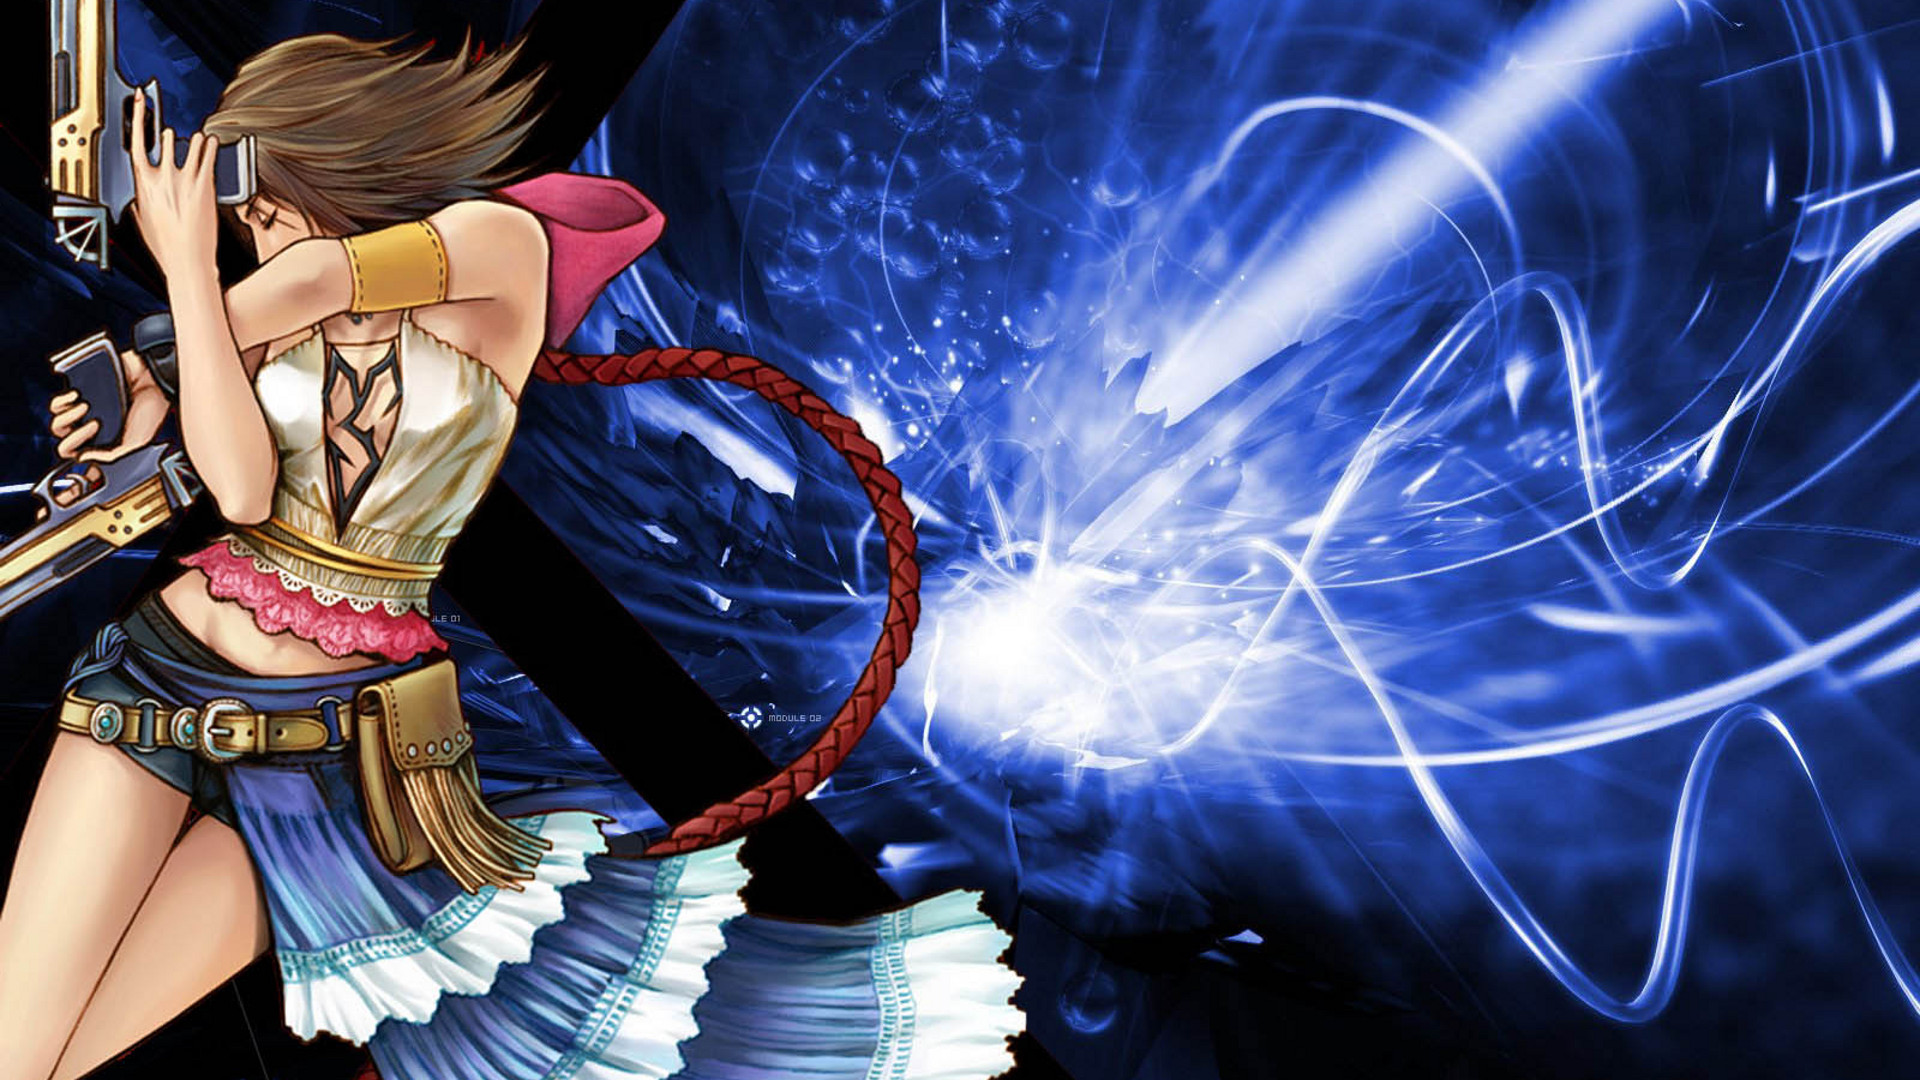 Final fantasy x download android